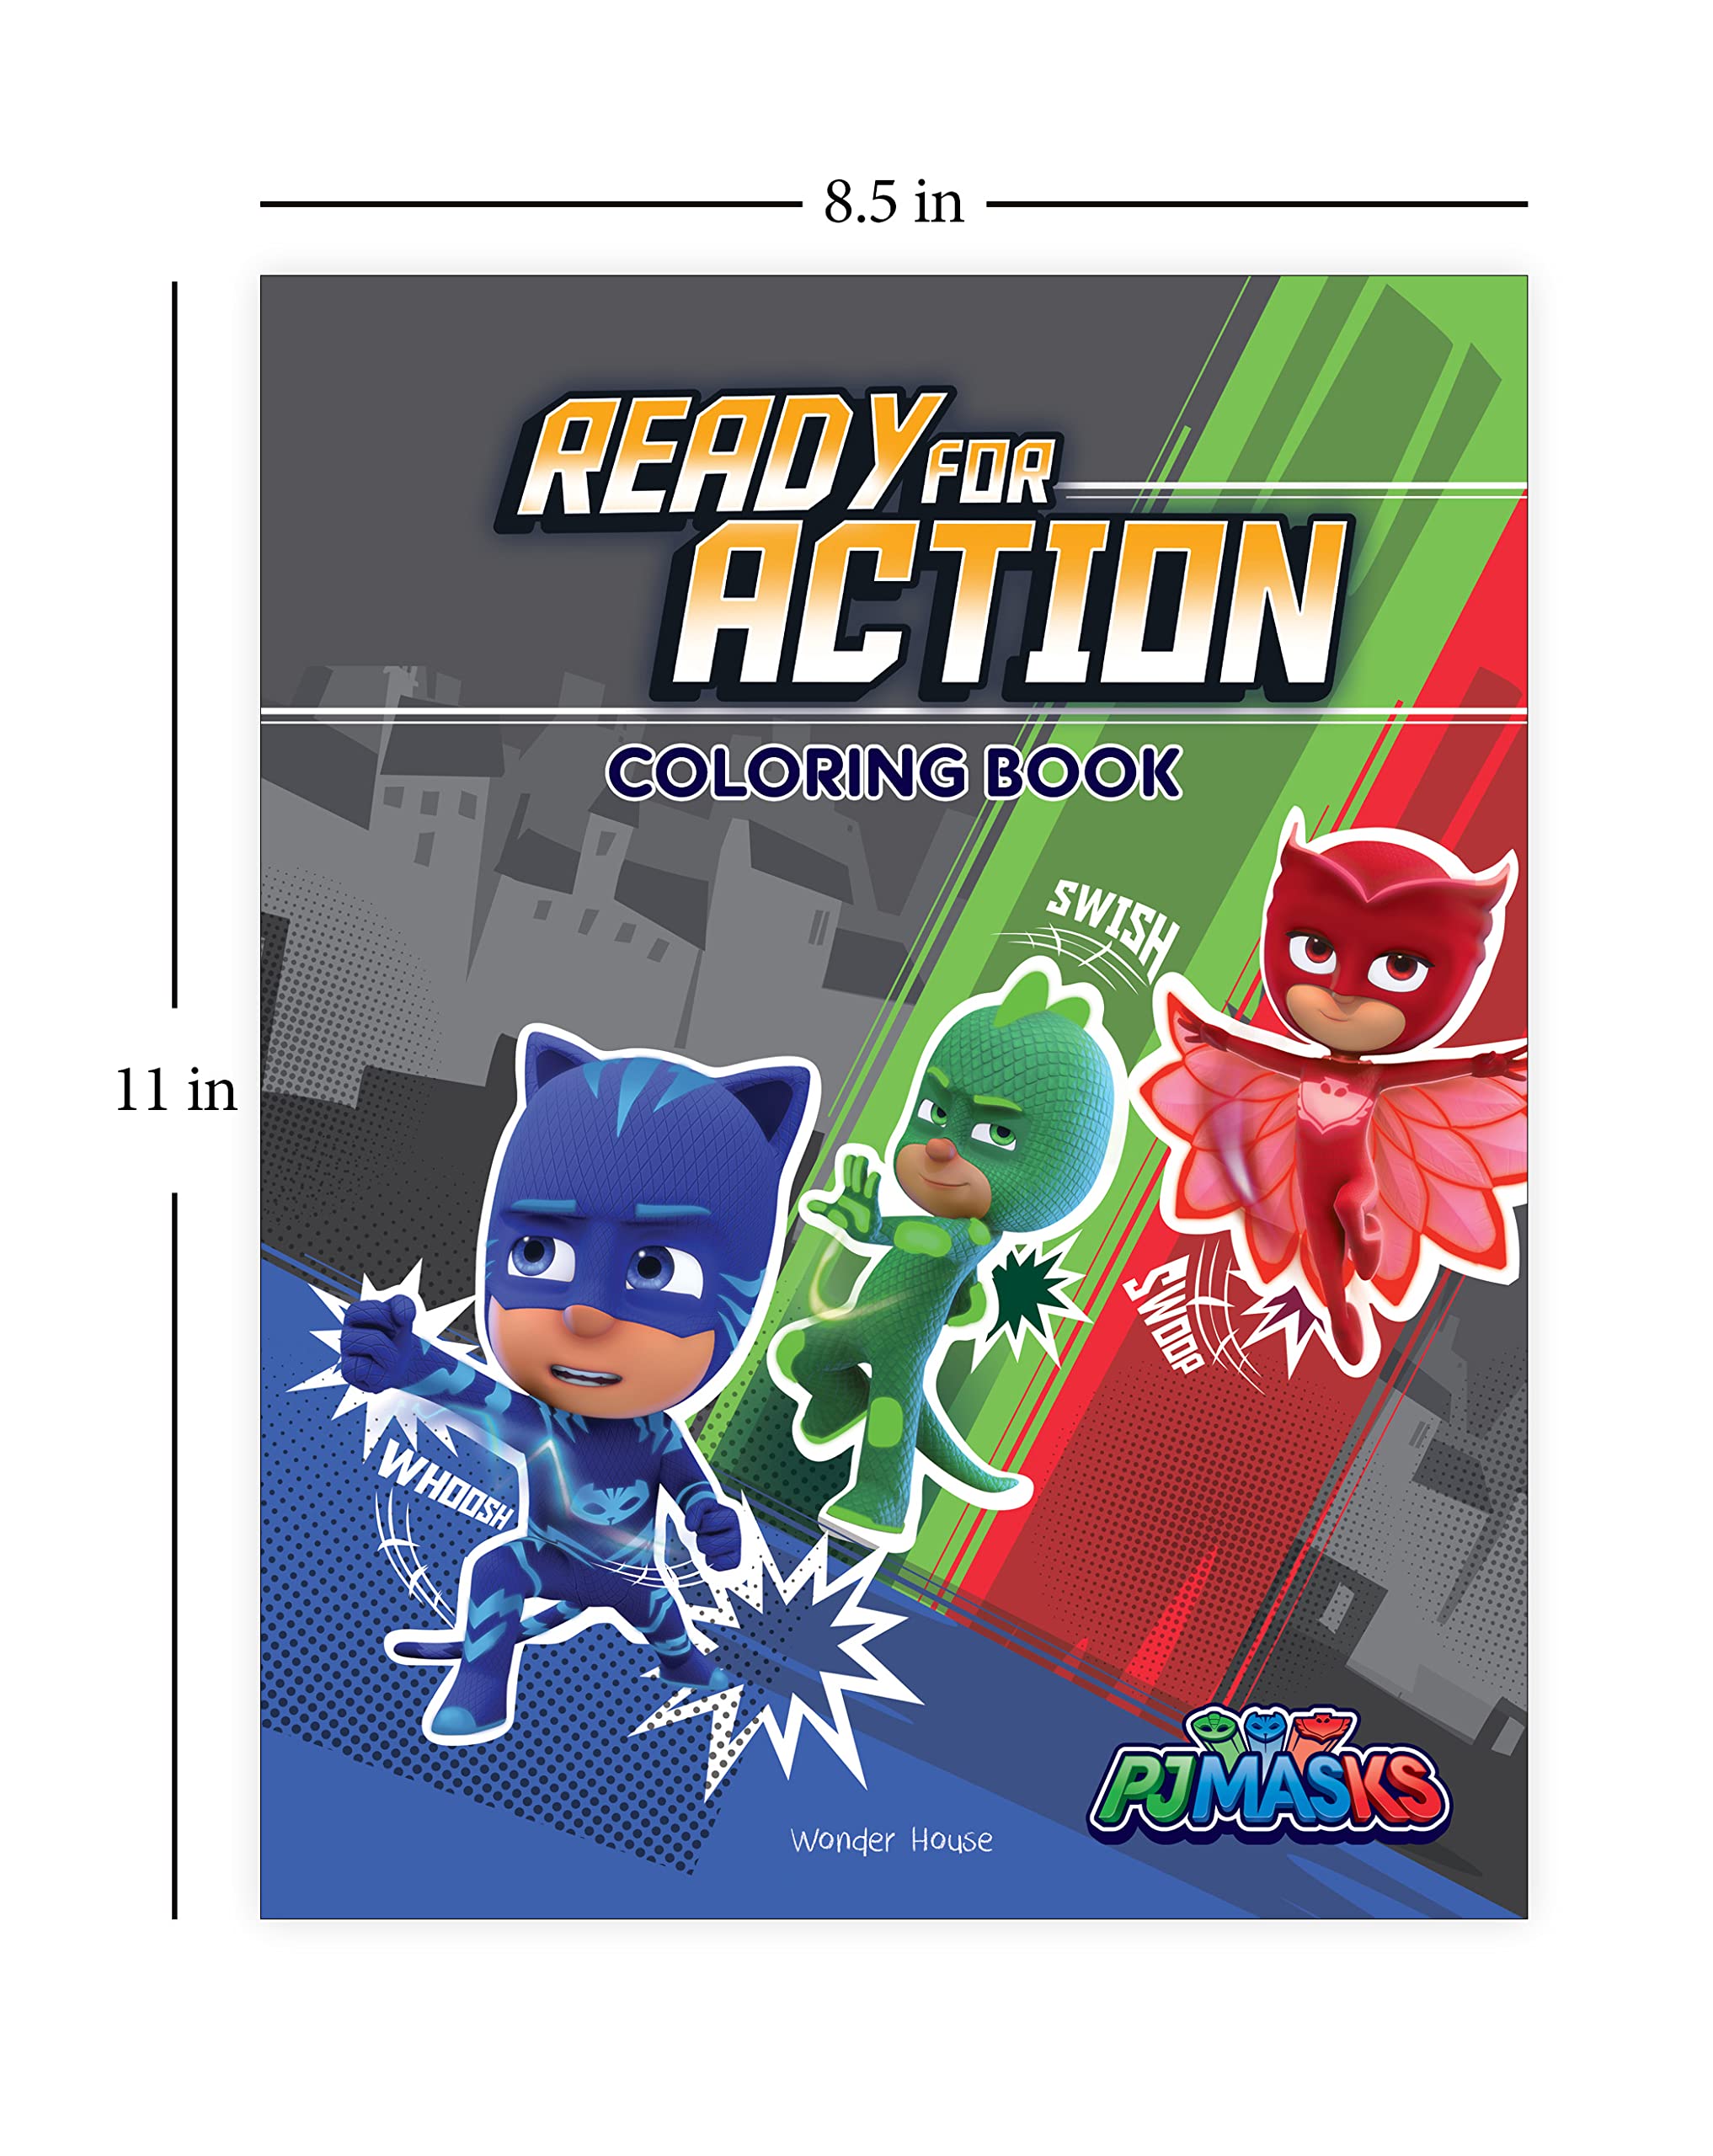 PJ Masks - Ready For Action Coloring Book For Kids